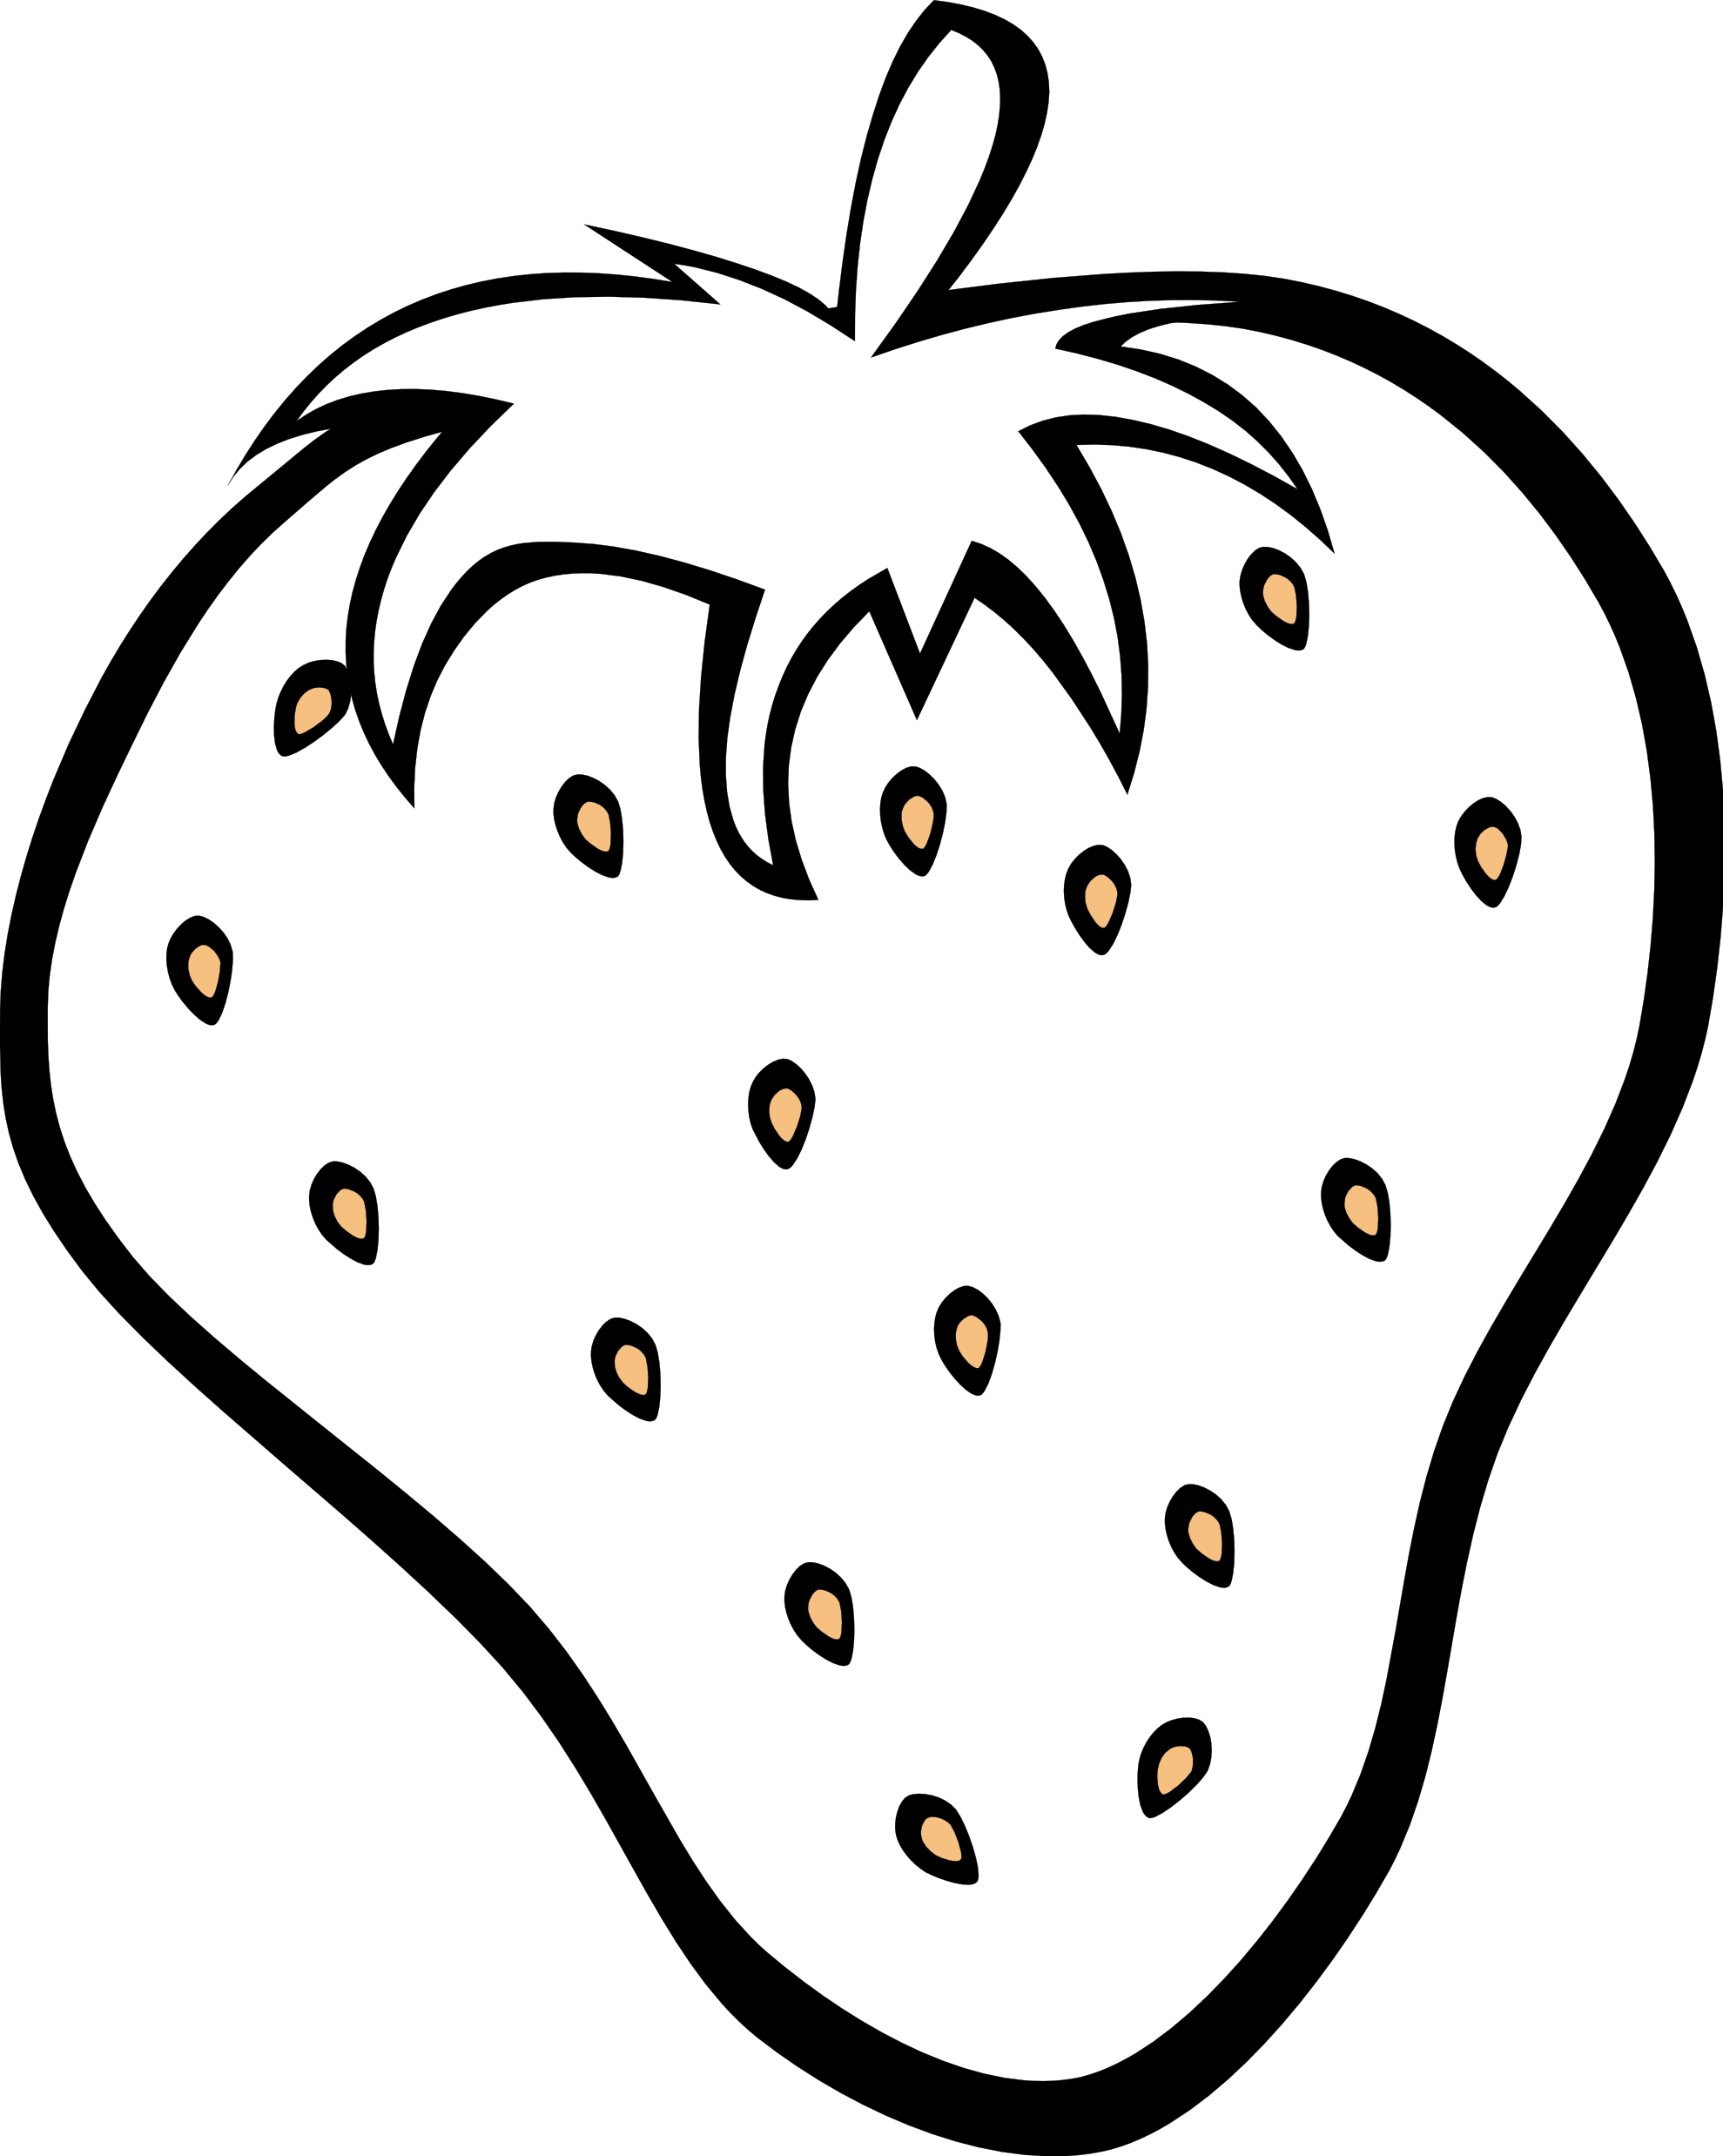 Fruit  black and white black and white fruit clipart free images